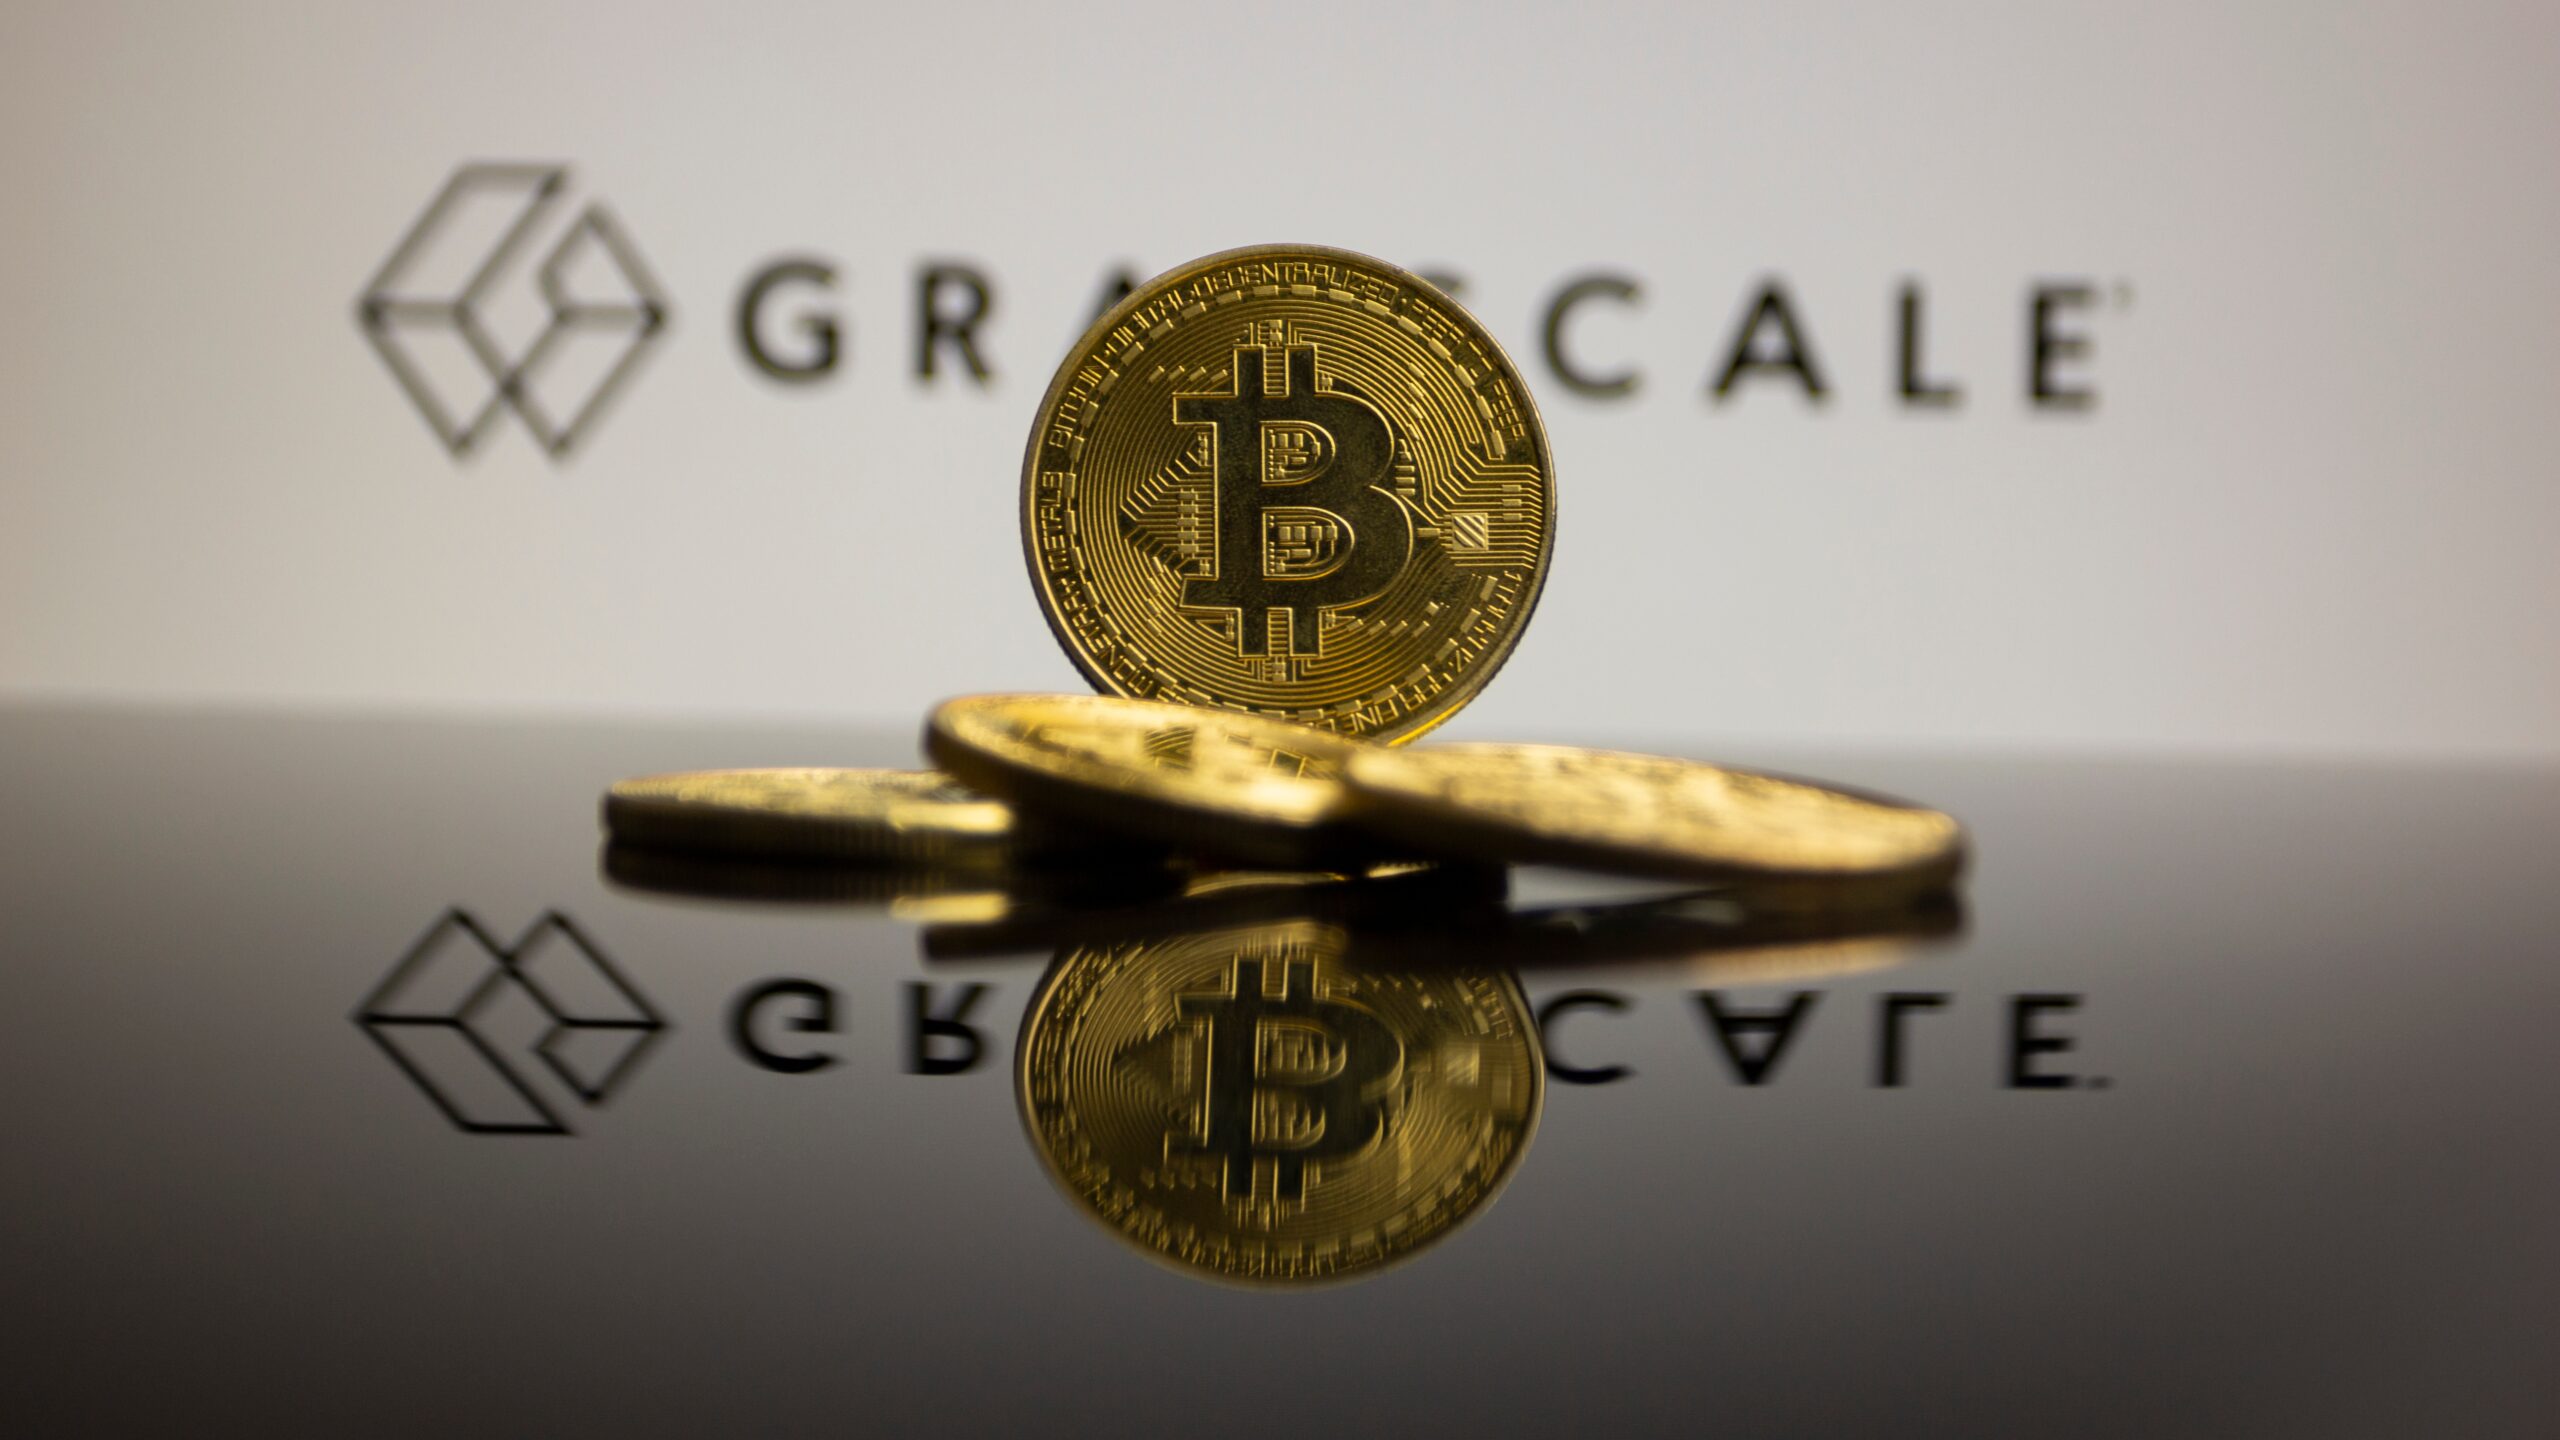 The Bitcoin ETF by Grayscale Records The Lowest Withdrawals Since Its Conversion